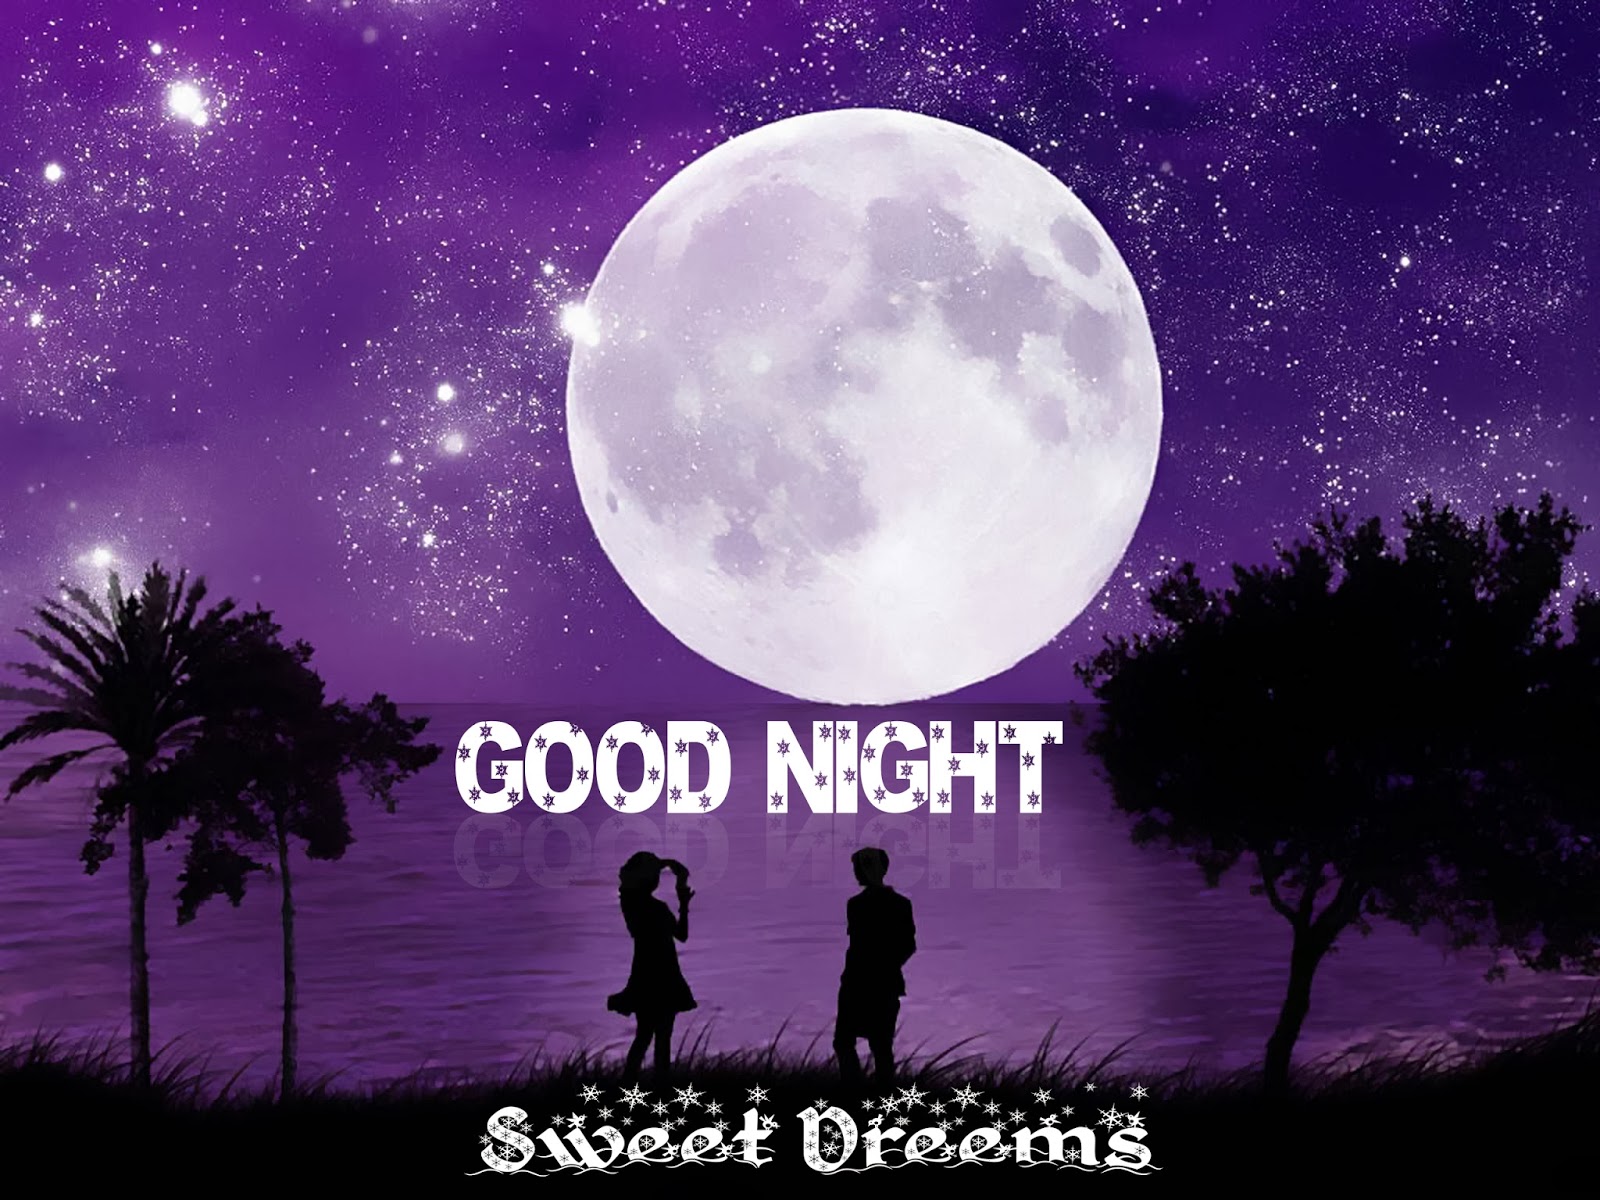 Image for Whatsapp - Image for Apps: Best Good Night Sweet Dreams HD images